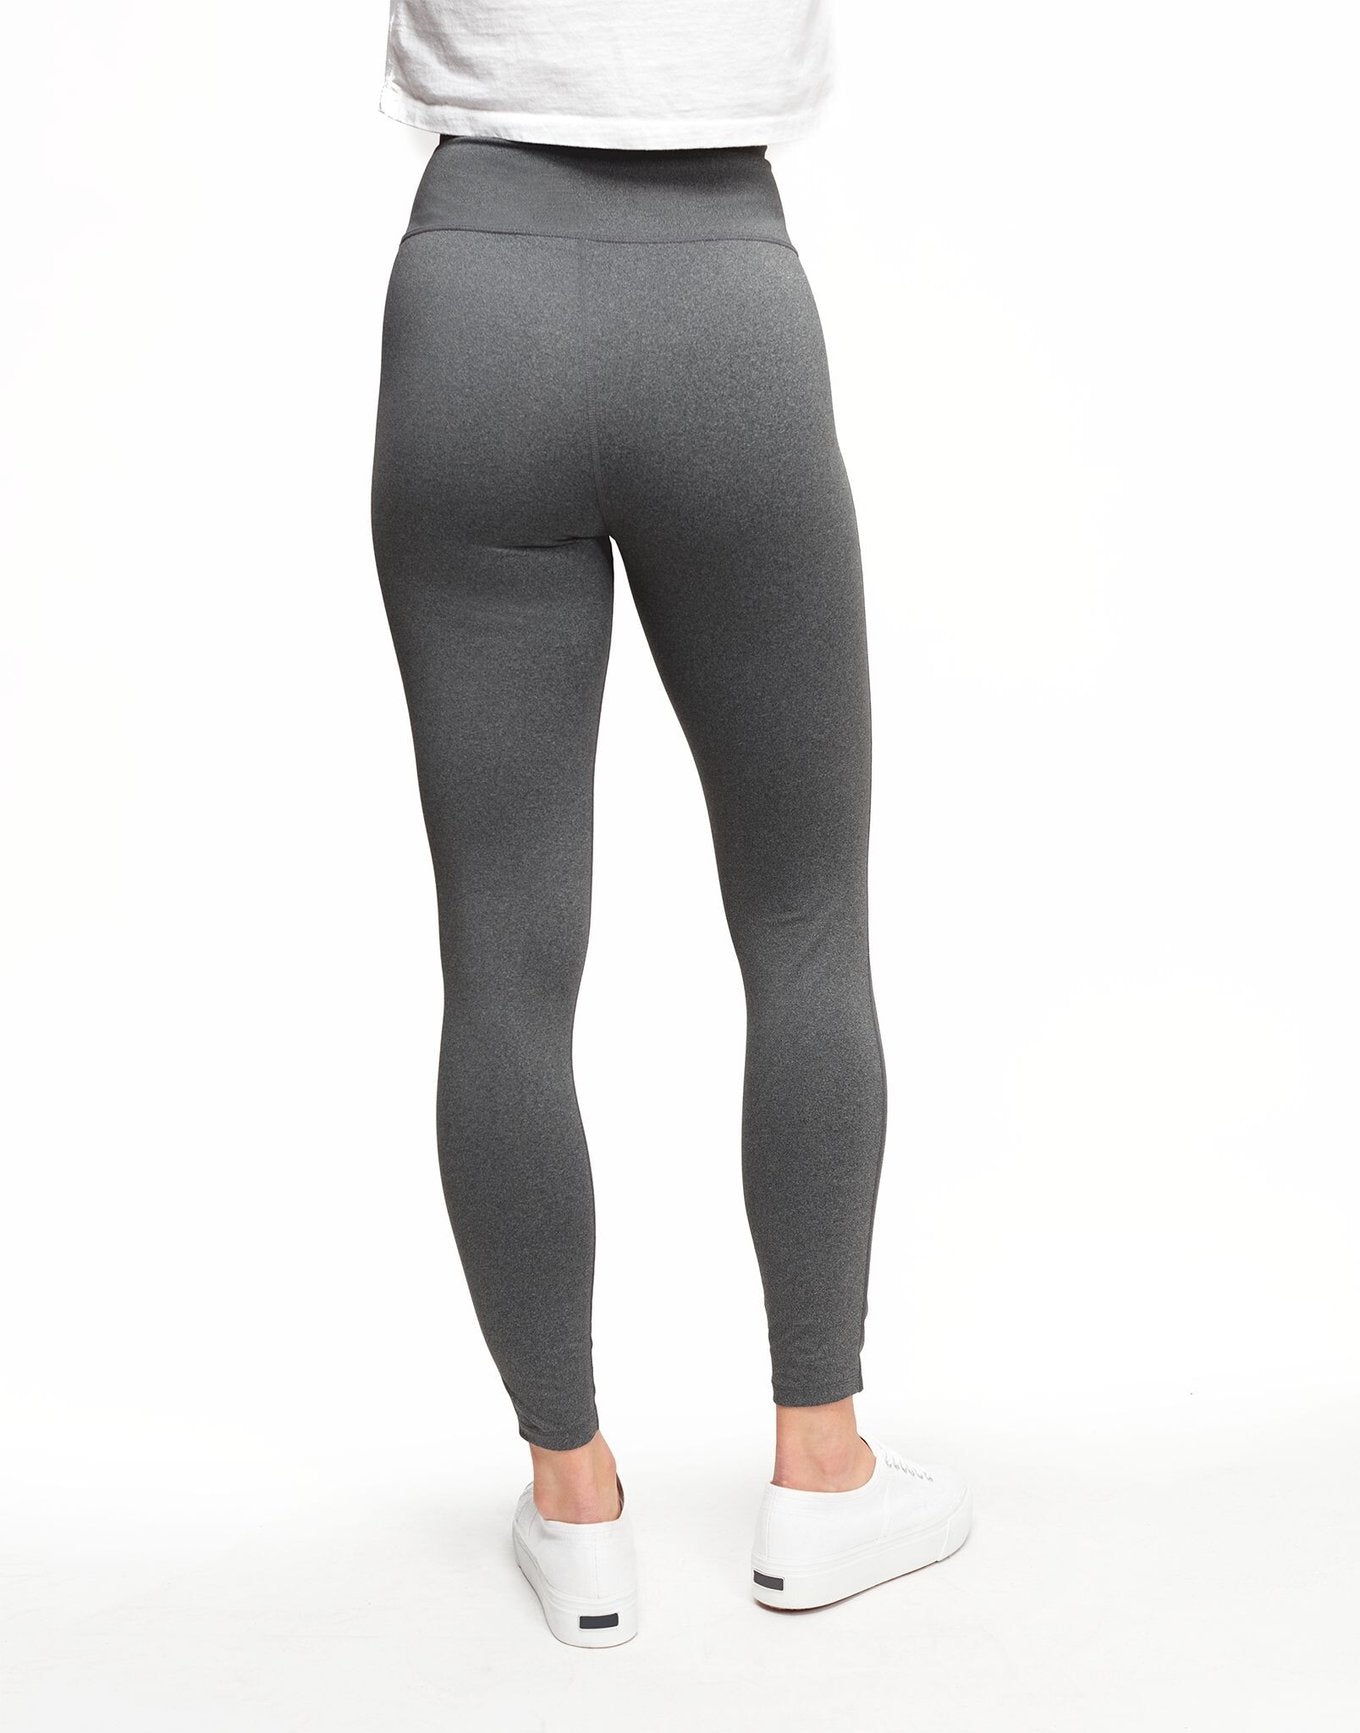 Adore Me Haley Heathered Legging Heather Compression Activewear Legging in color Meteorite Light Heather and shape legging